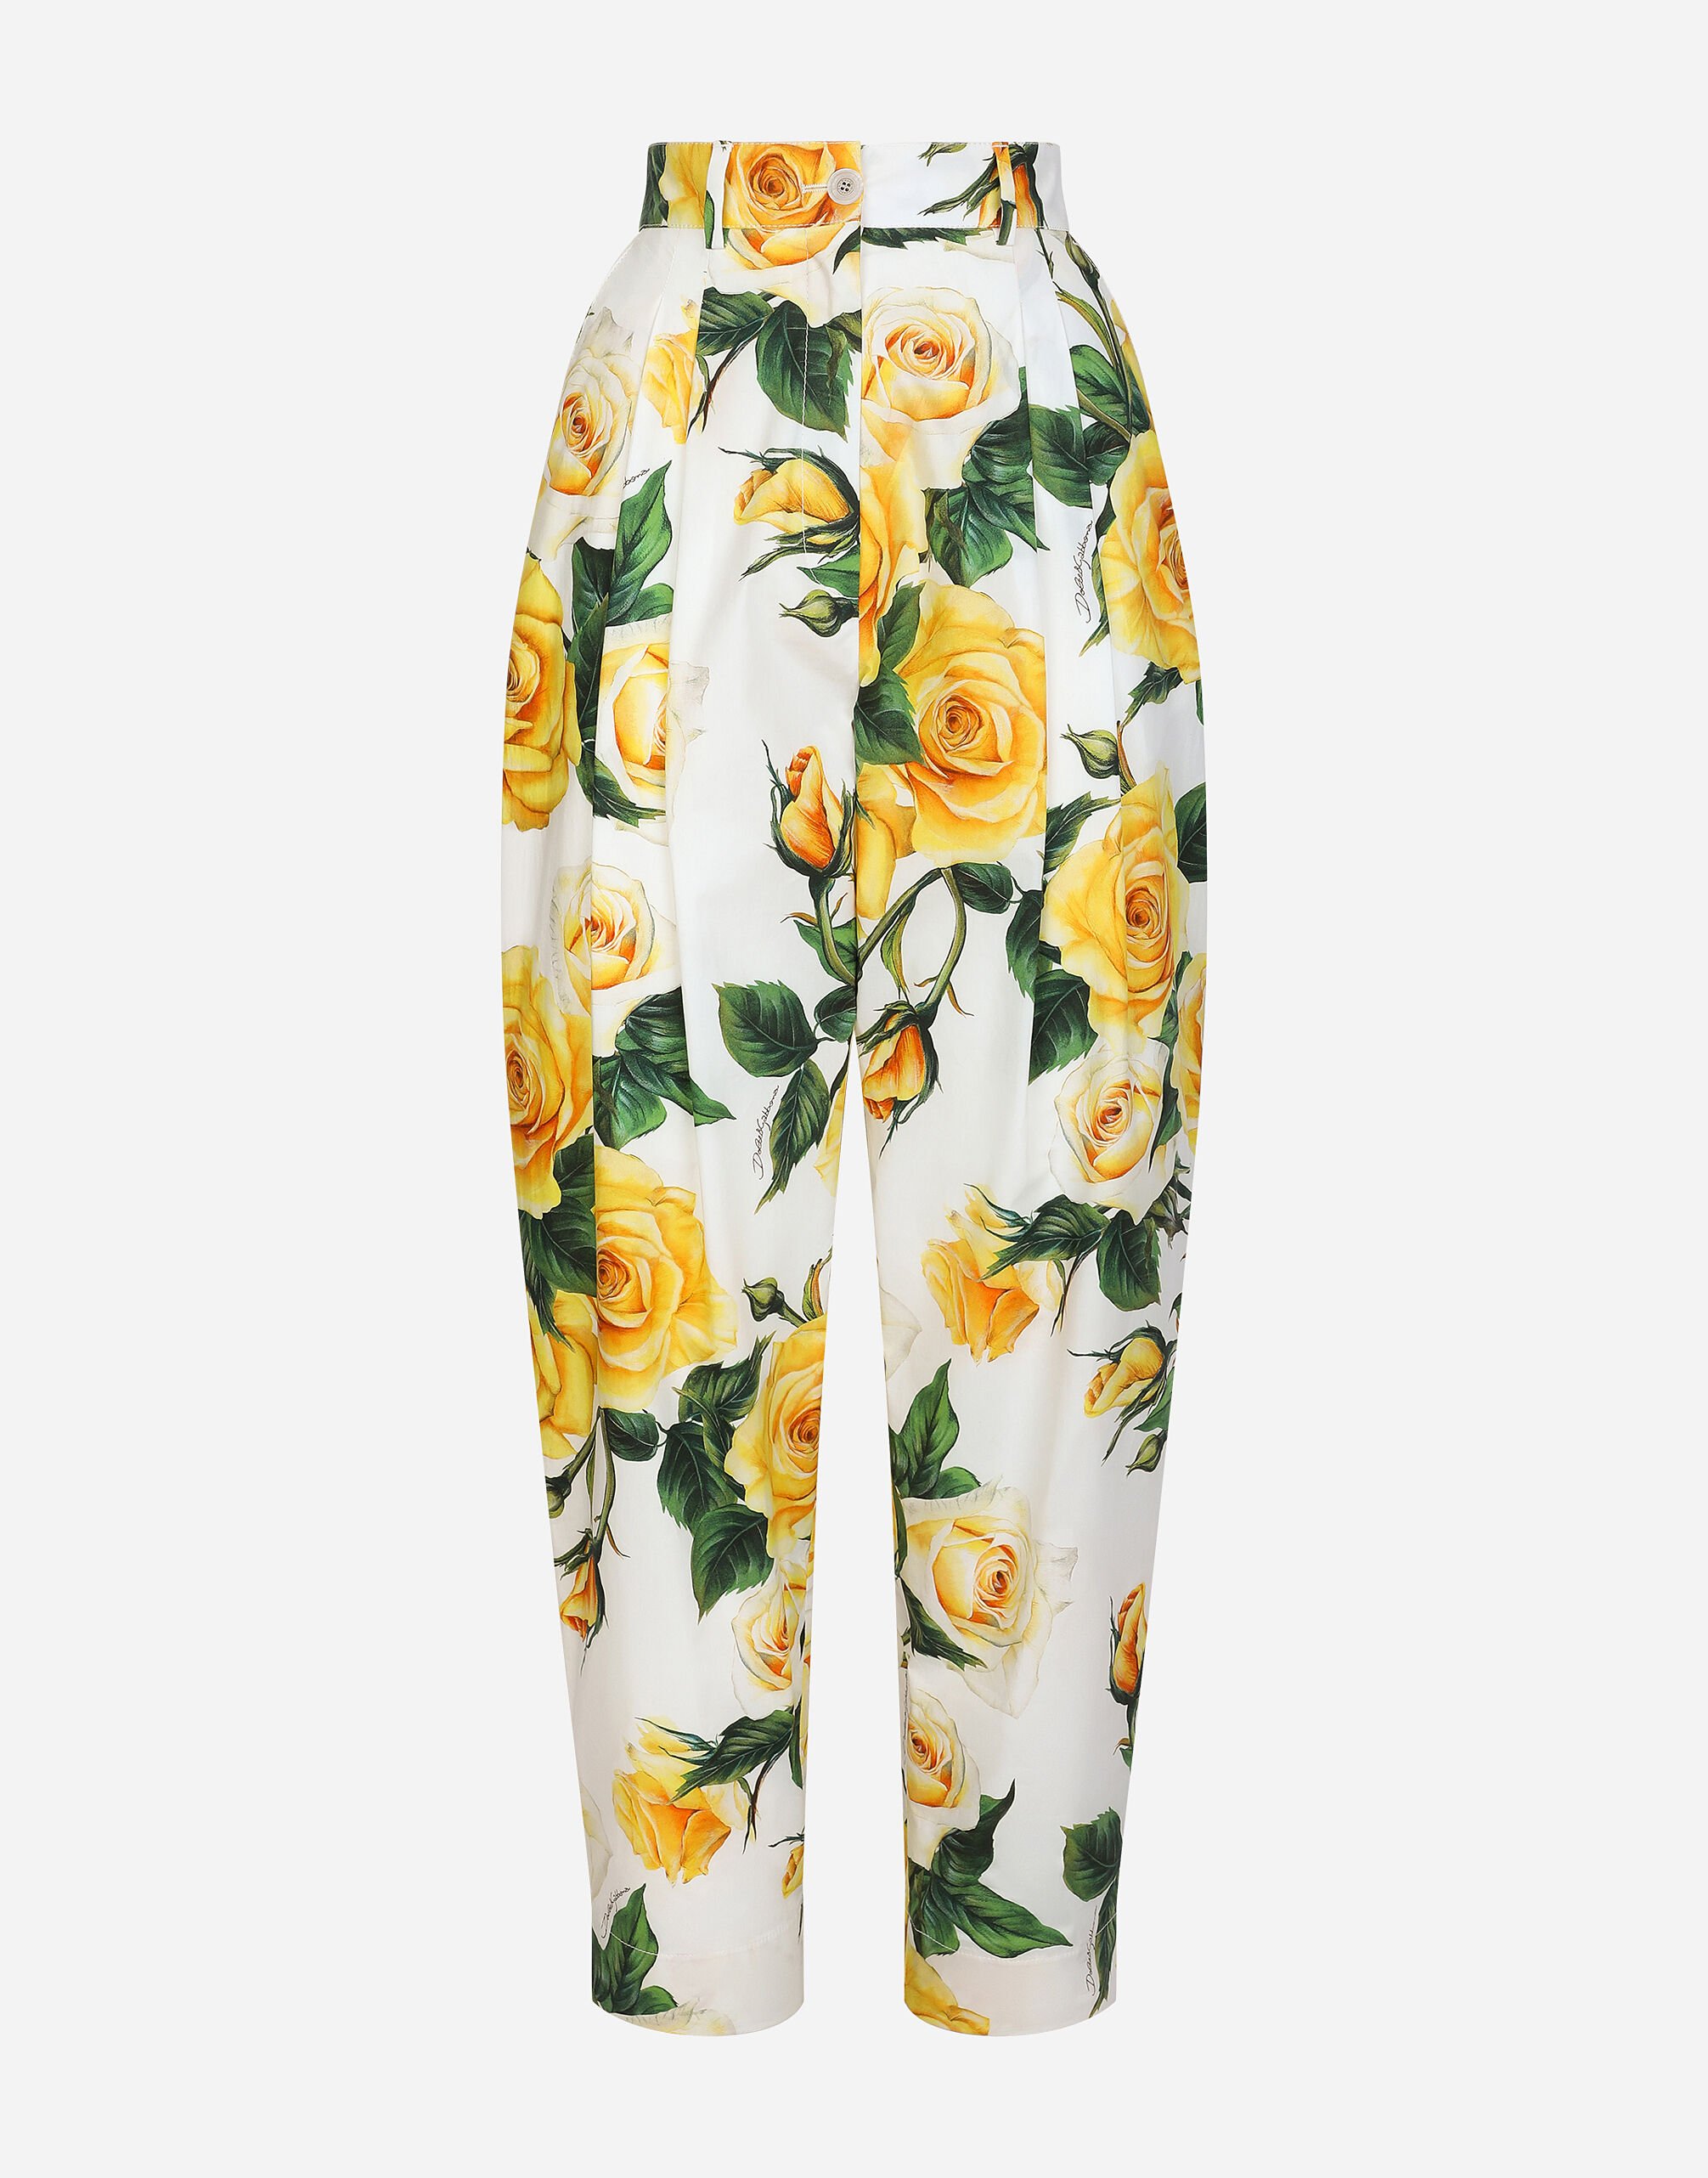 Dolce & Gabbana High-waisted cotton pants with yellow rose print Print FTC3HTHS5Q0